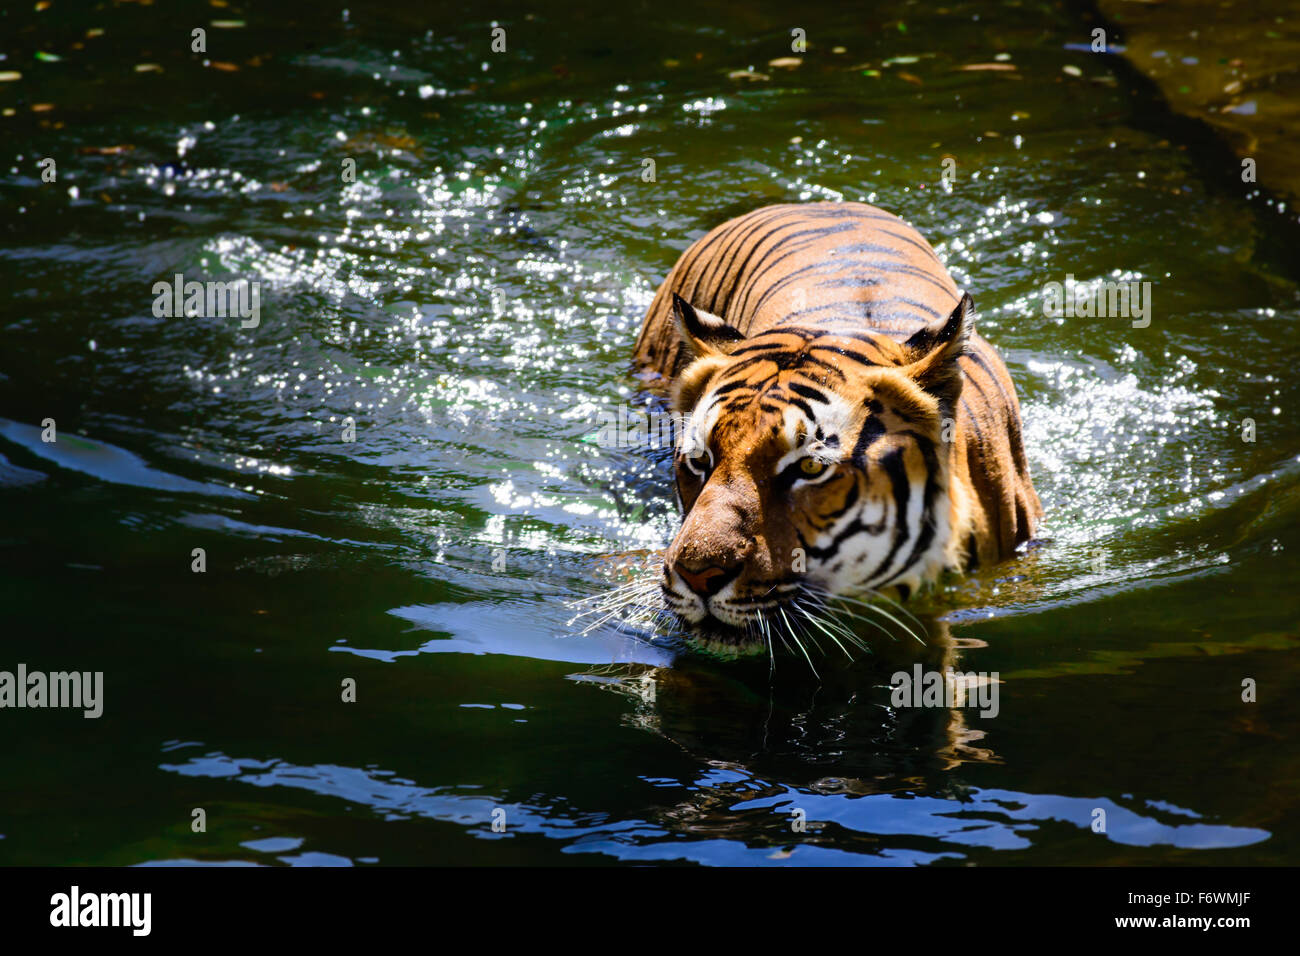 A rather nervous tiger takes a cold bath on a hot summer day Stock Photo